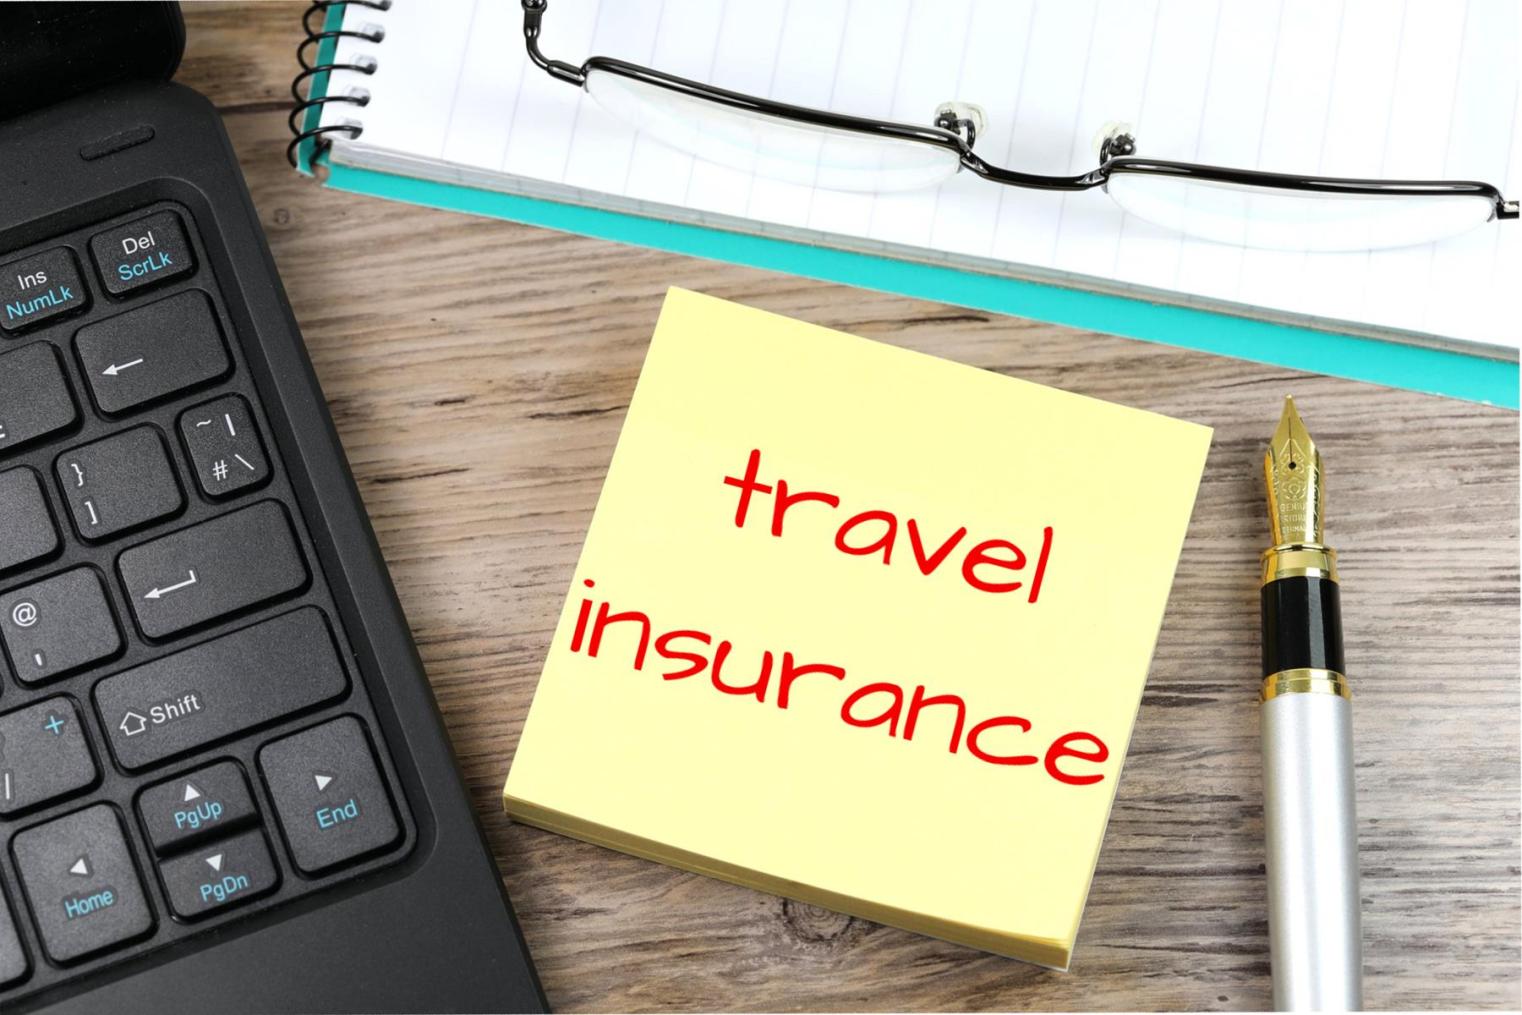 How Can Travel Insurance Protect Me During My Next Trip?